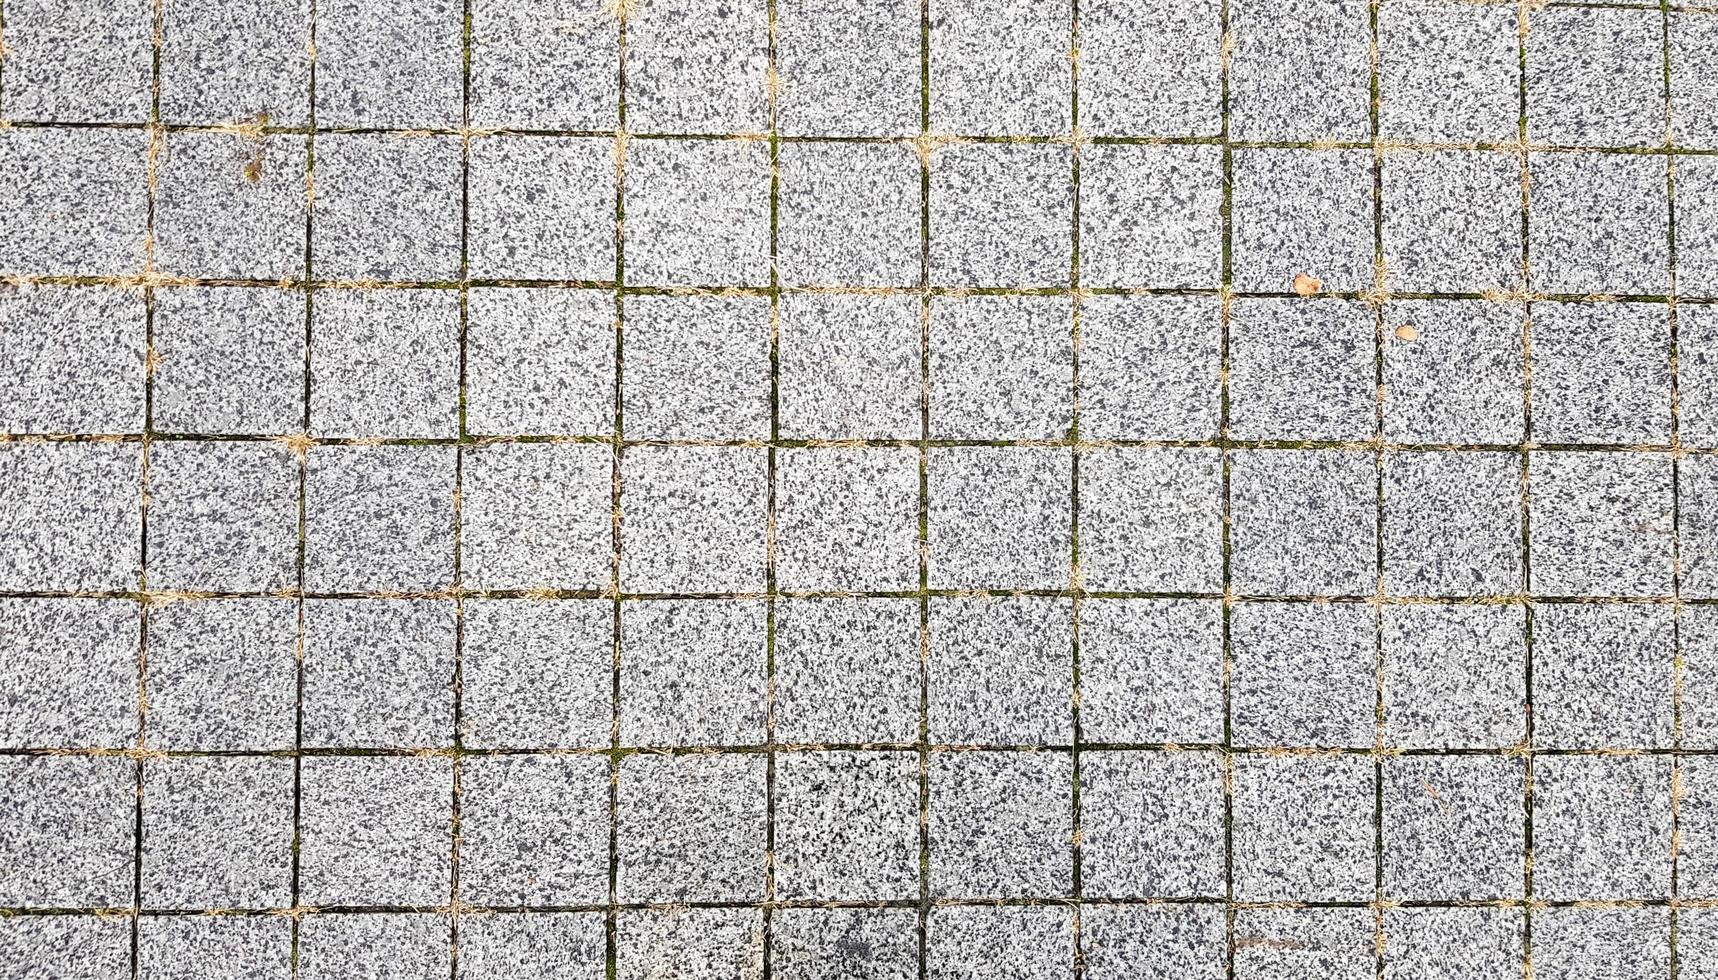 Stone sidewalk. Paving stones on roads and sidewalks in the old part of the city. Paving stone material background. Granite, cobblestone. Concrete paver floor template for background. photo